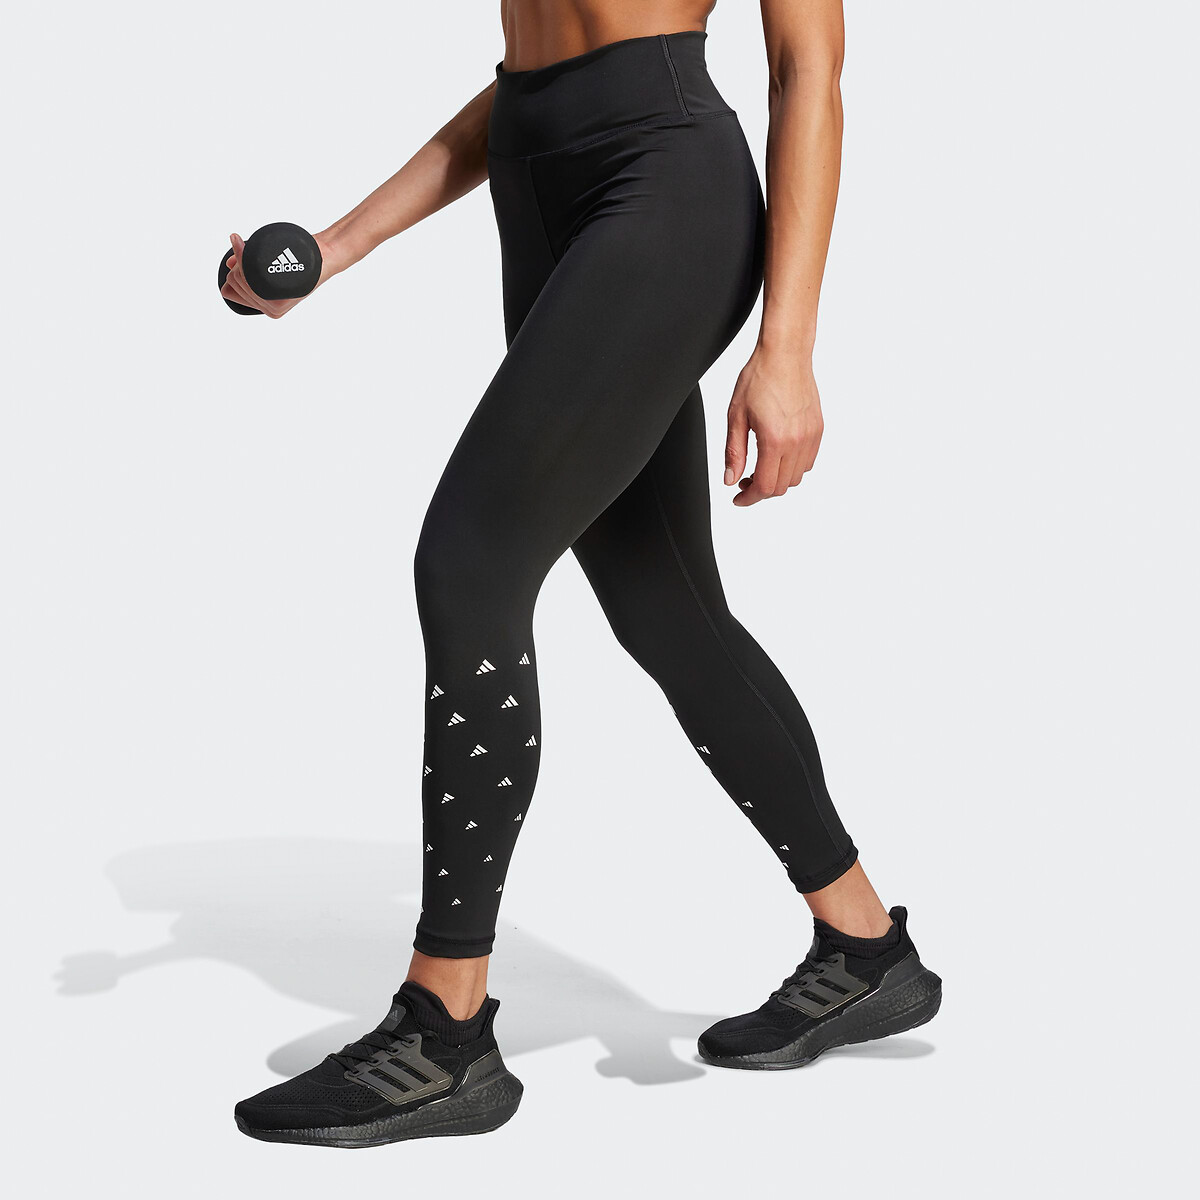 Techfit Colorblock 7/8 Leggings by adidas Performance Online | THE ICONIC |  Australia